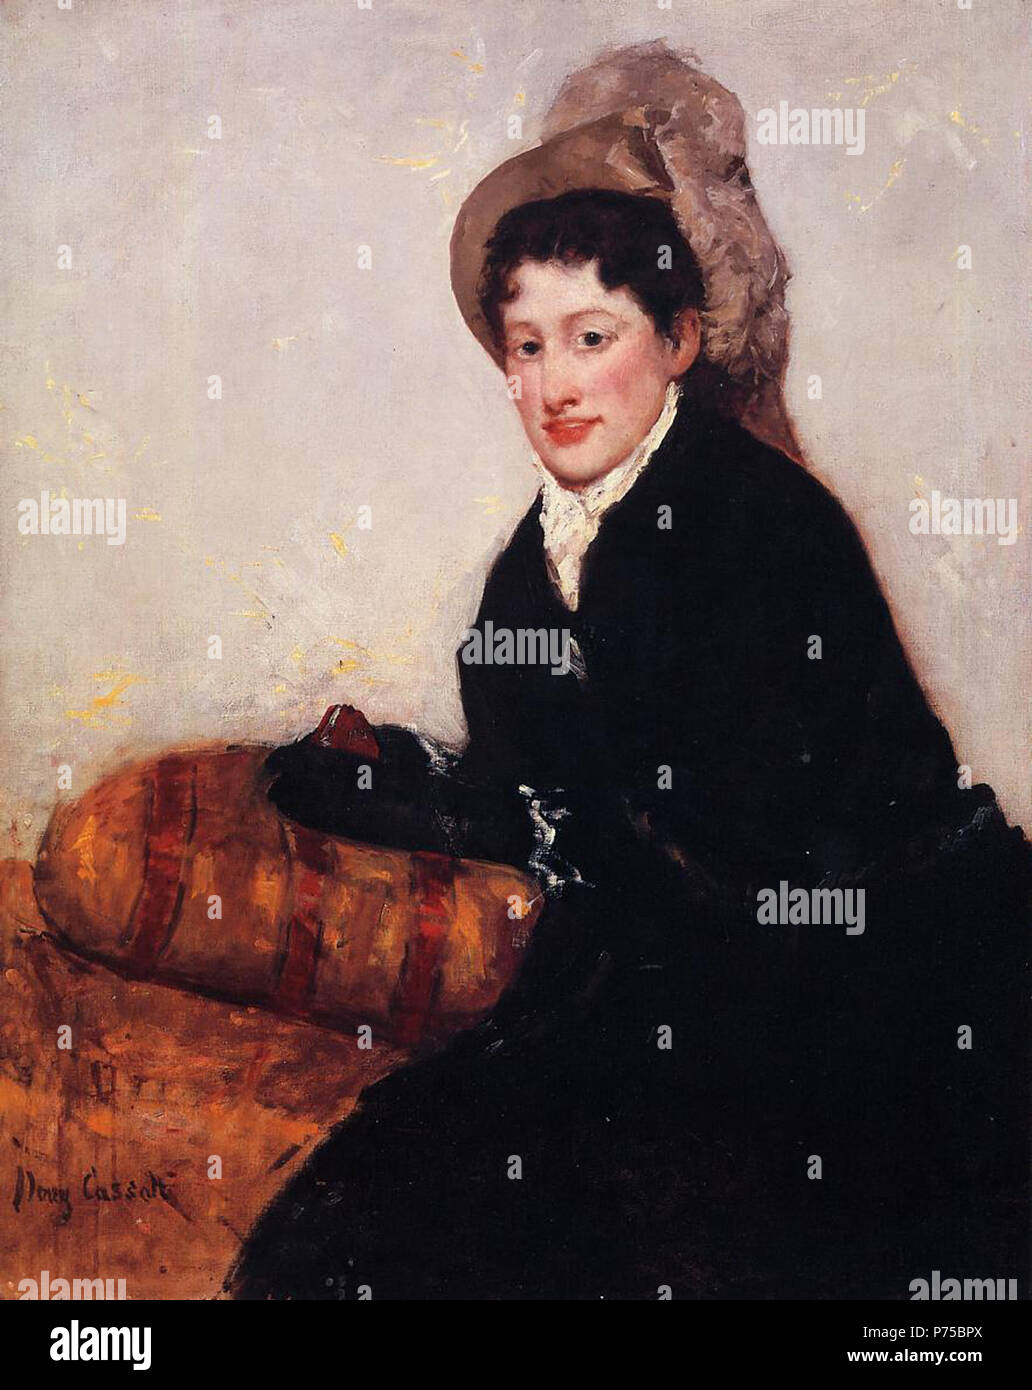 English: Portrait of Madame X Dressed for the Matinee by Mary Stevenson Cassatt, 1877-78, oil on canvas, 39 5/8 x 31 13/16 in. (100.6 x 80.8 cm), North Carolina Museum of Art . 1877-78 23 Portrait of Madame X Dressed for the Matinee by Mary Cassatt Stock Photo